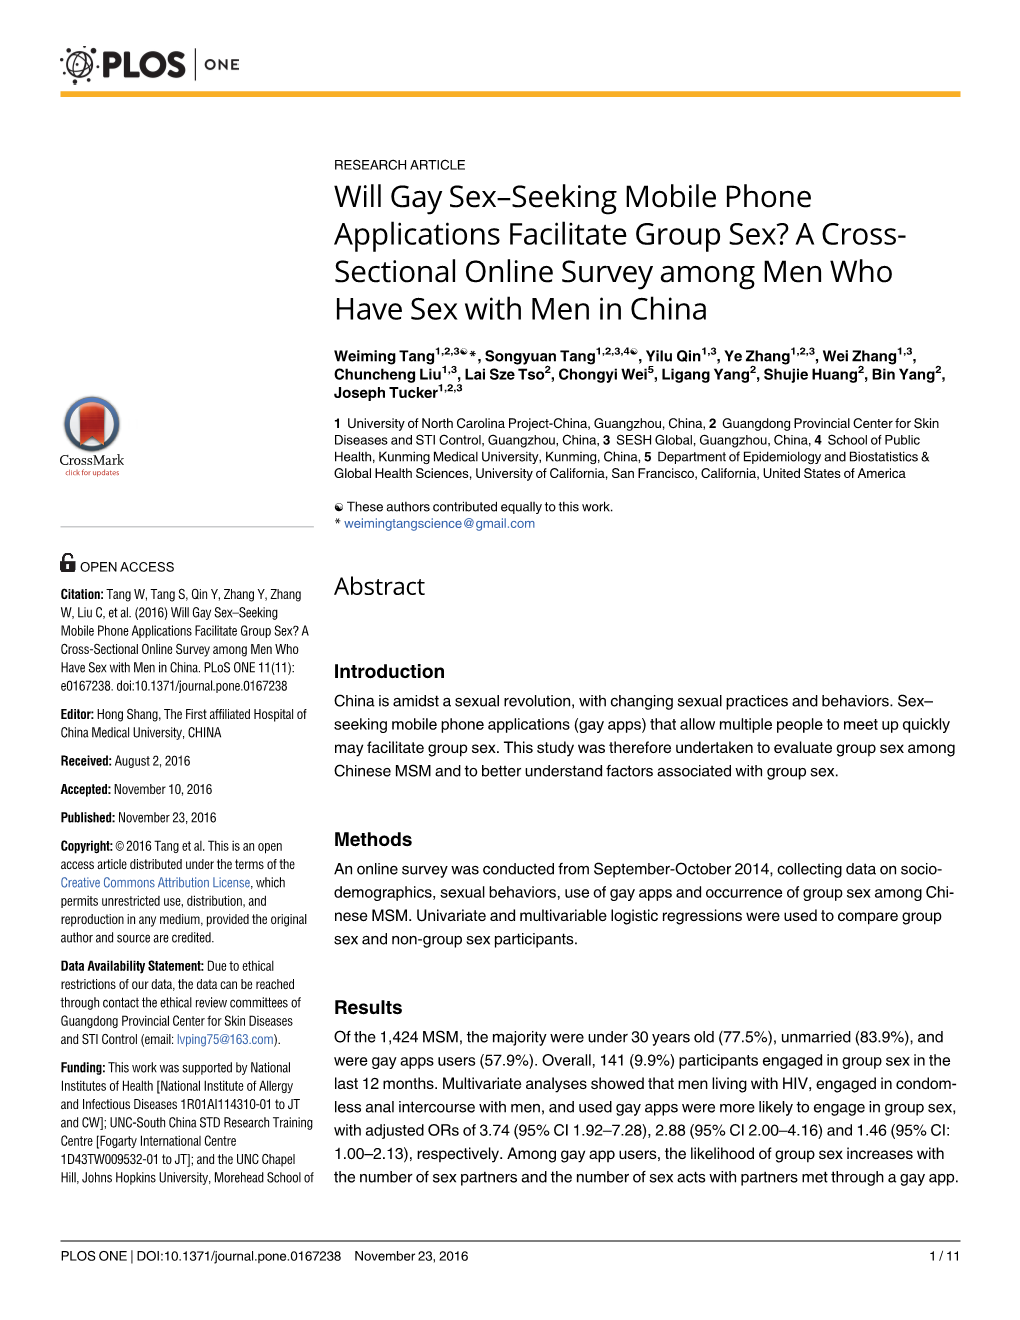 Will Gay Sex–Seeking Mobile Phone Applications Facilitate Group Sex? a Cross- Sectional Online Survey Among Men Who Have Sex with Men in China